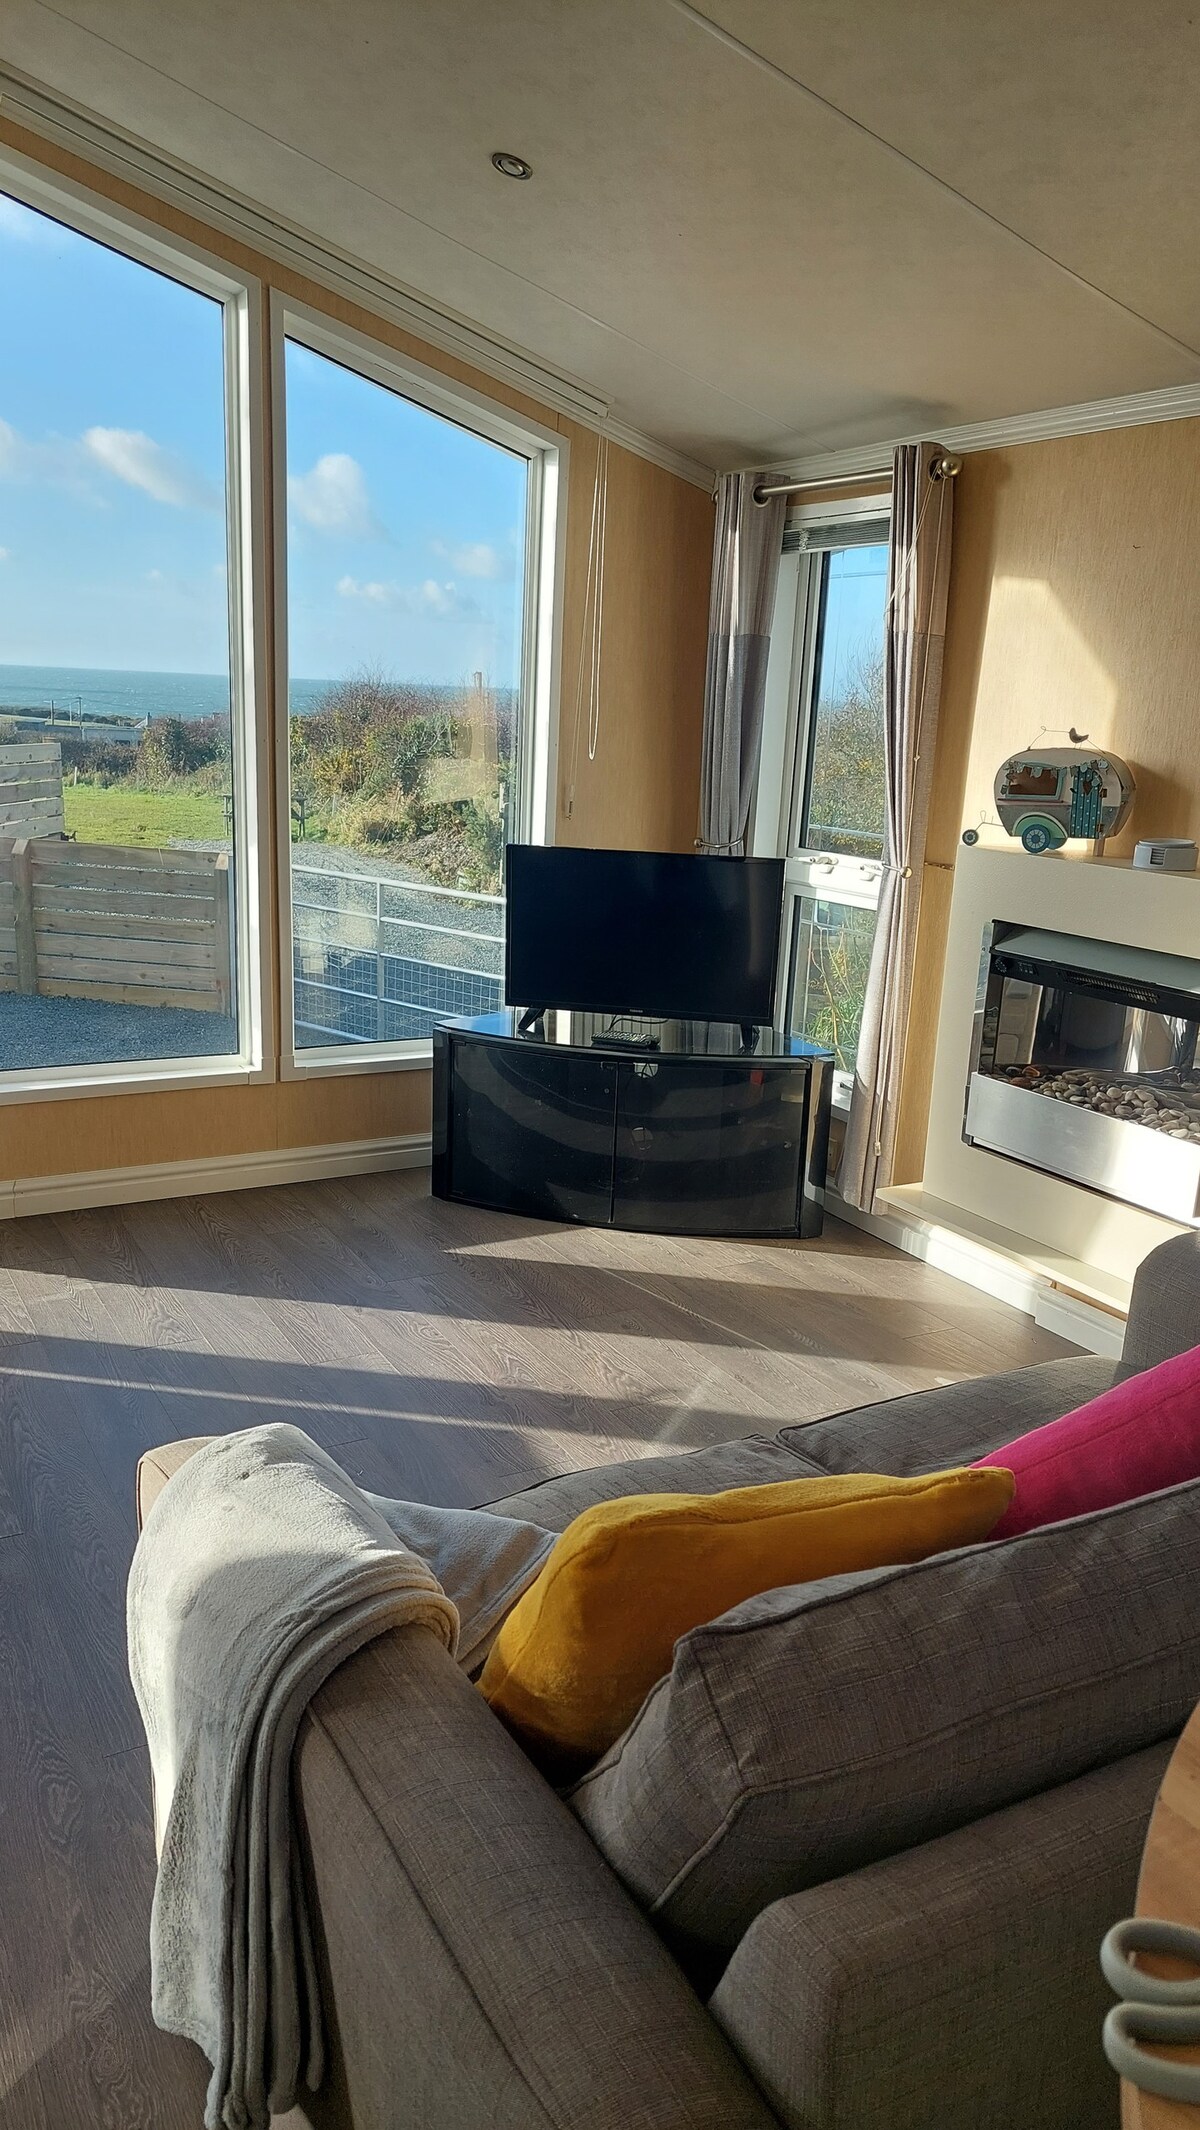 Seaview Lodge Chalet Church Bay Anglesey可供4人入住